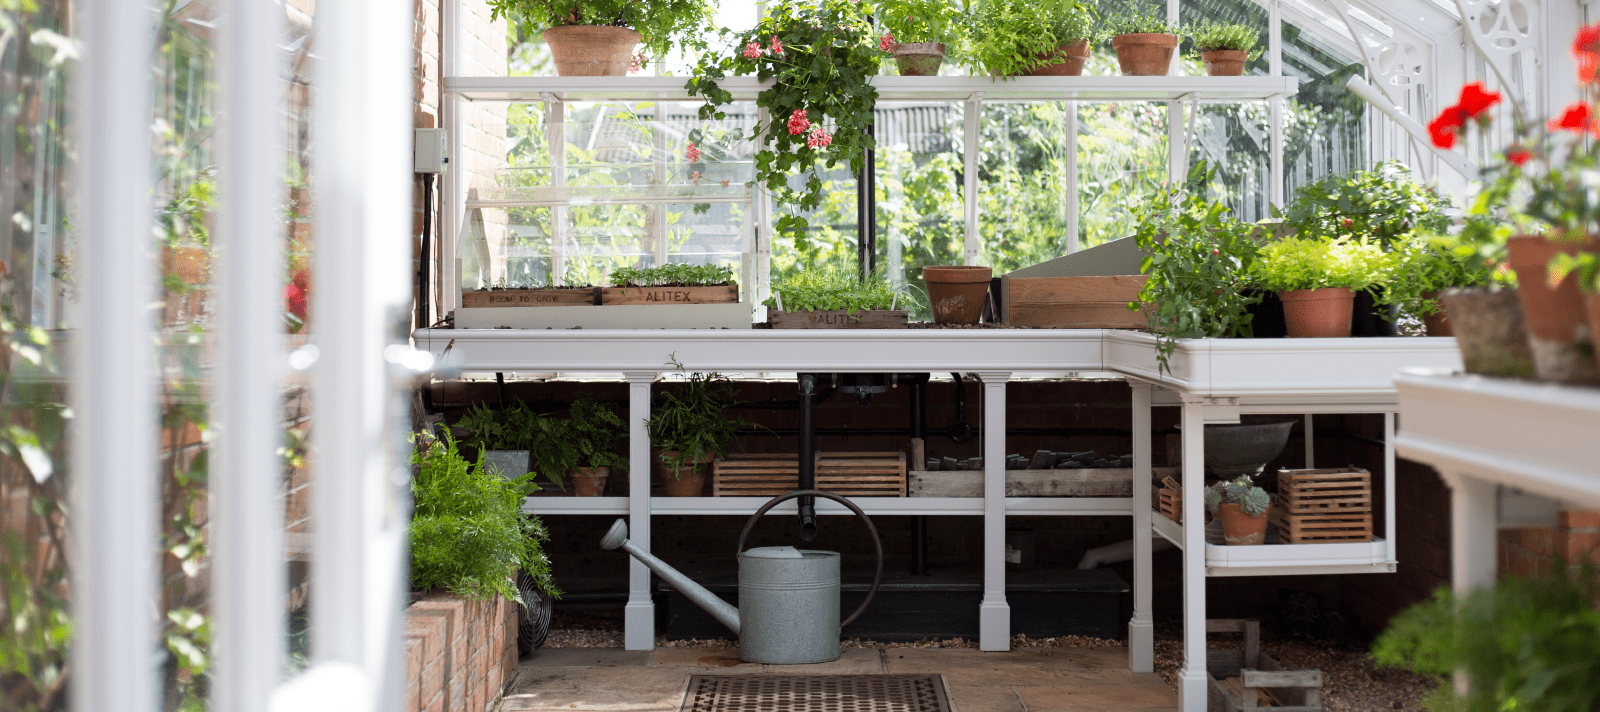 Greenhouse benching inside a victorian greenhouse